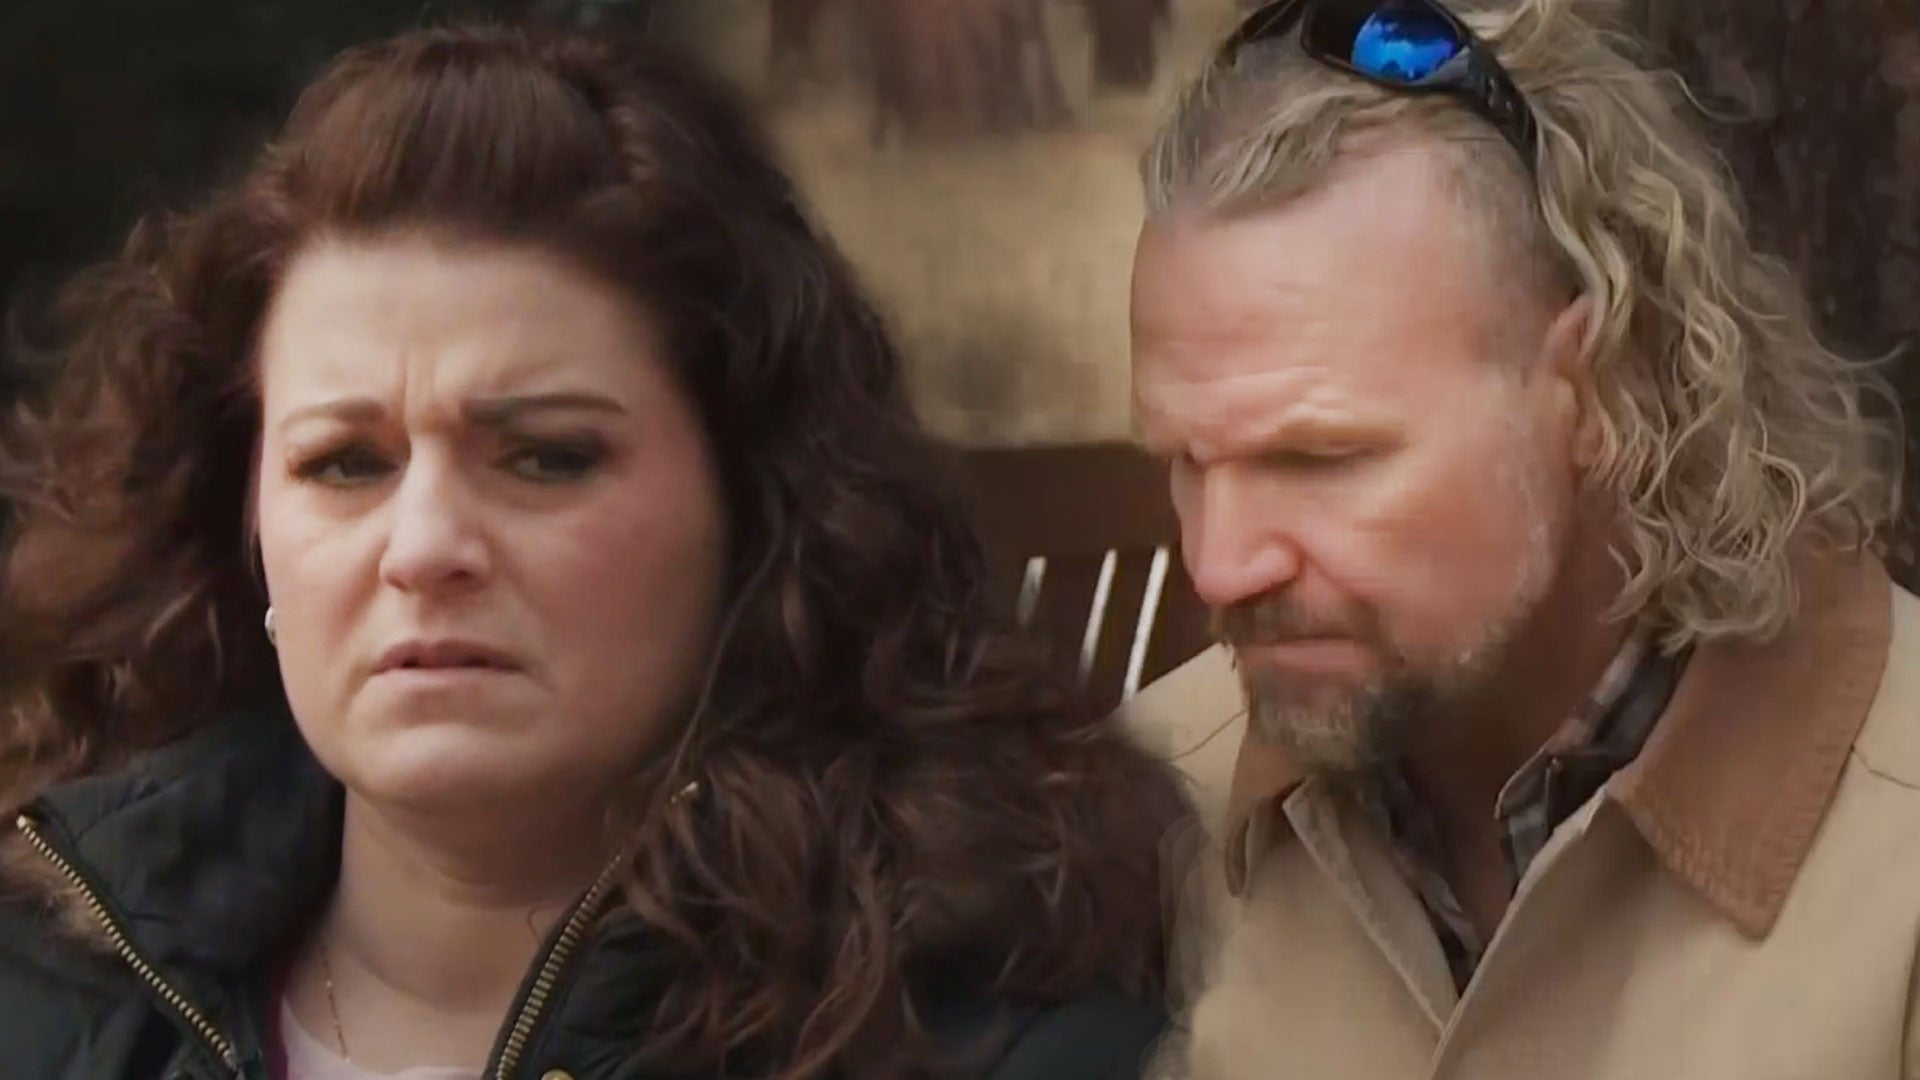 'Sister Wives': Robyn Says She Knows Kody Has Thoughts About Leaving Her   